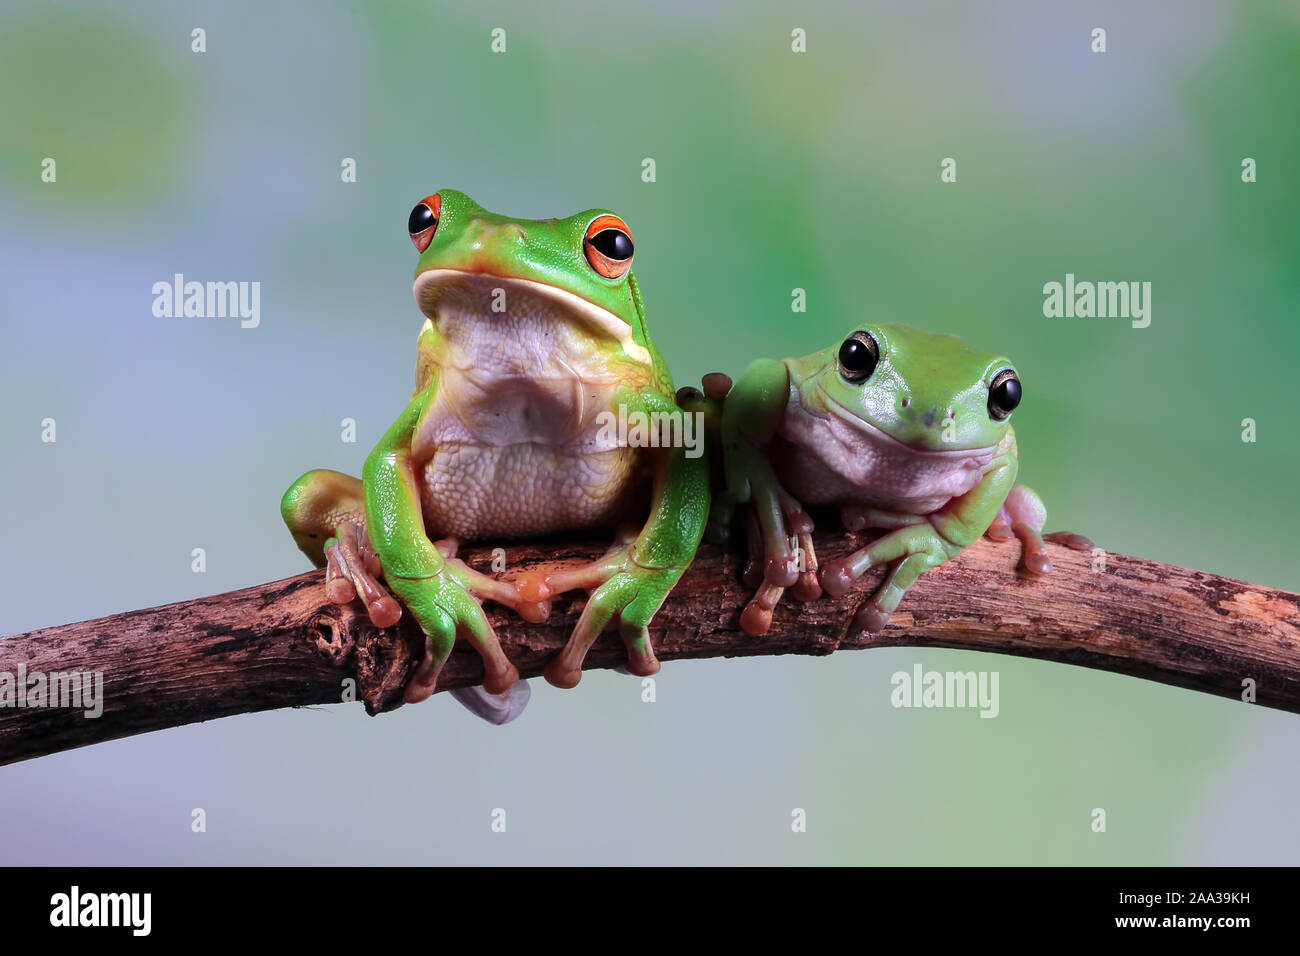 Australian white tree frog and dumpy tree frog on a branch, Indonesia Stock Photo